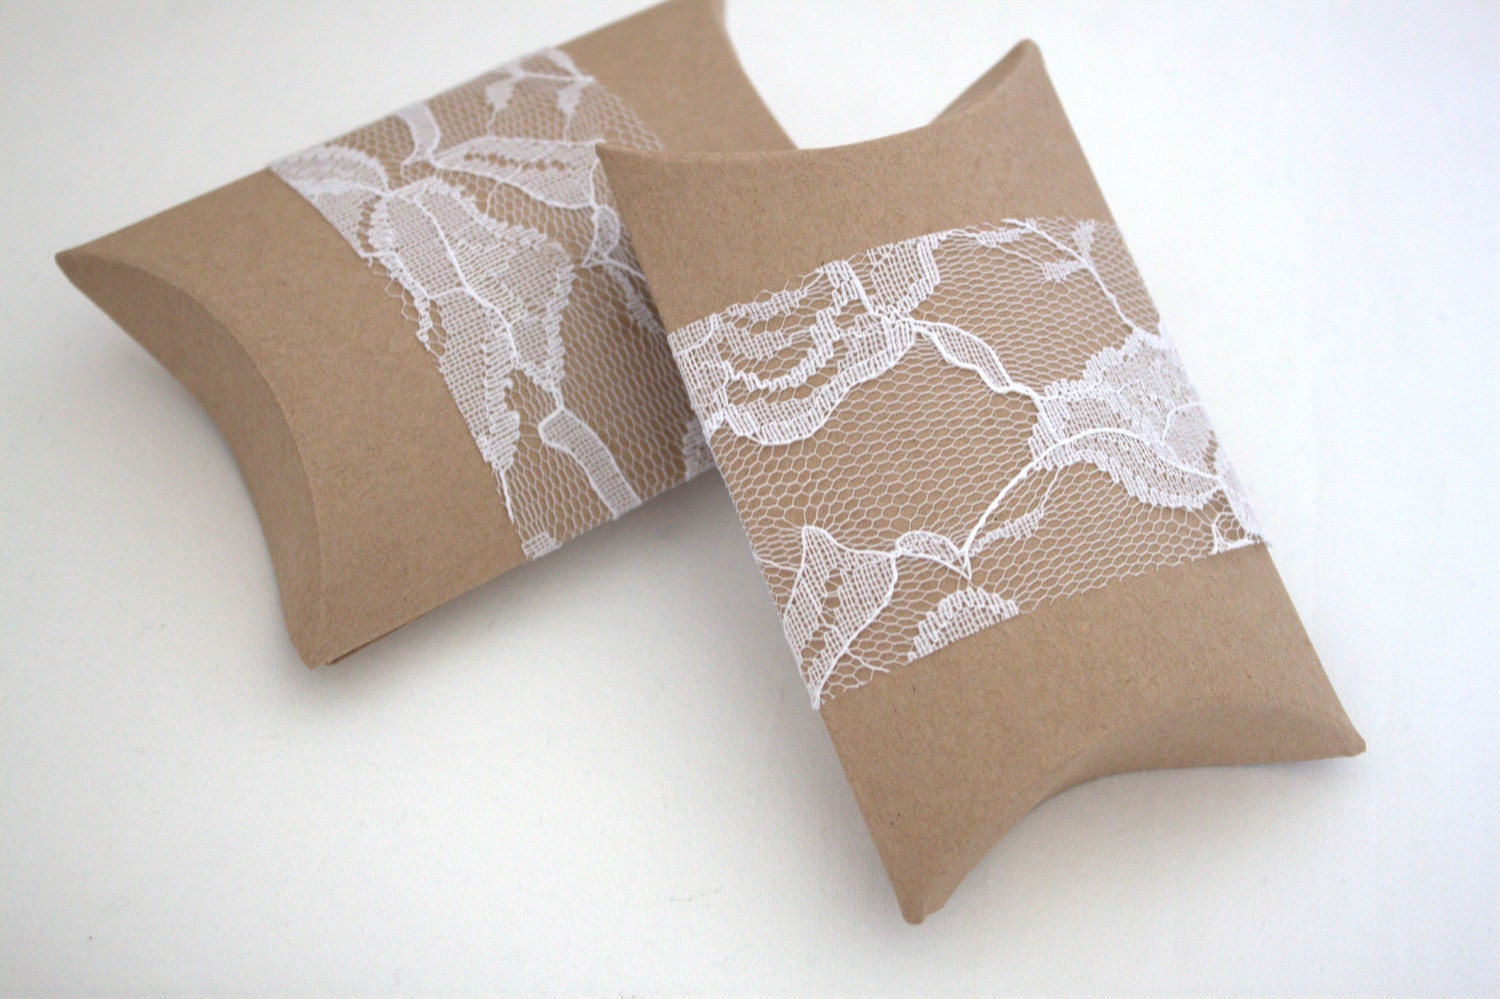 lace pillow boxes rustic wedding favors rustic wedding decorations 